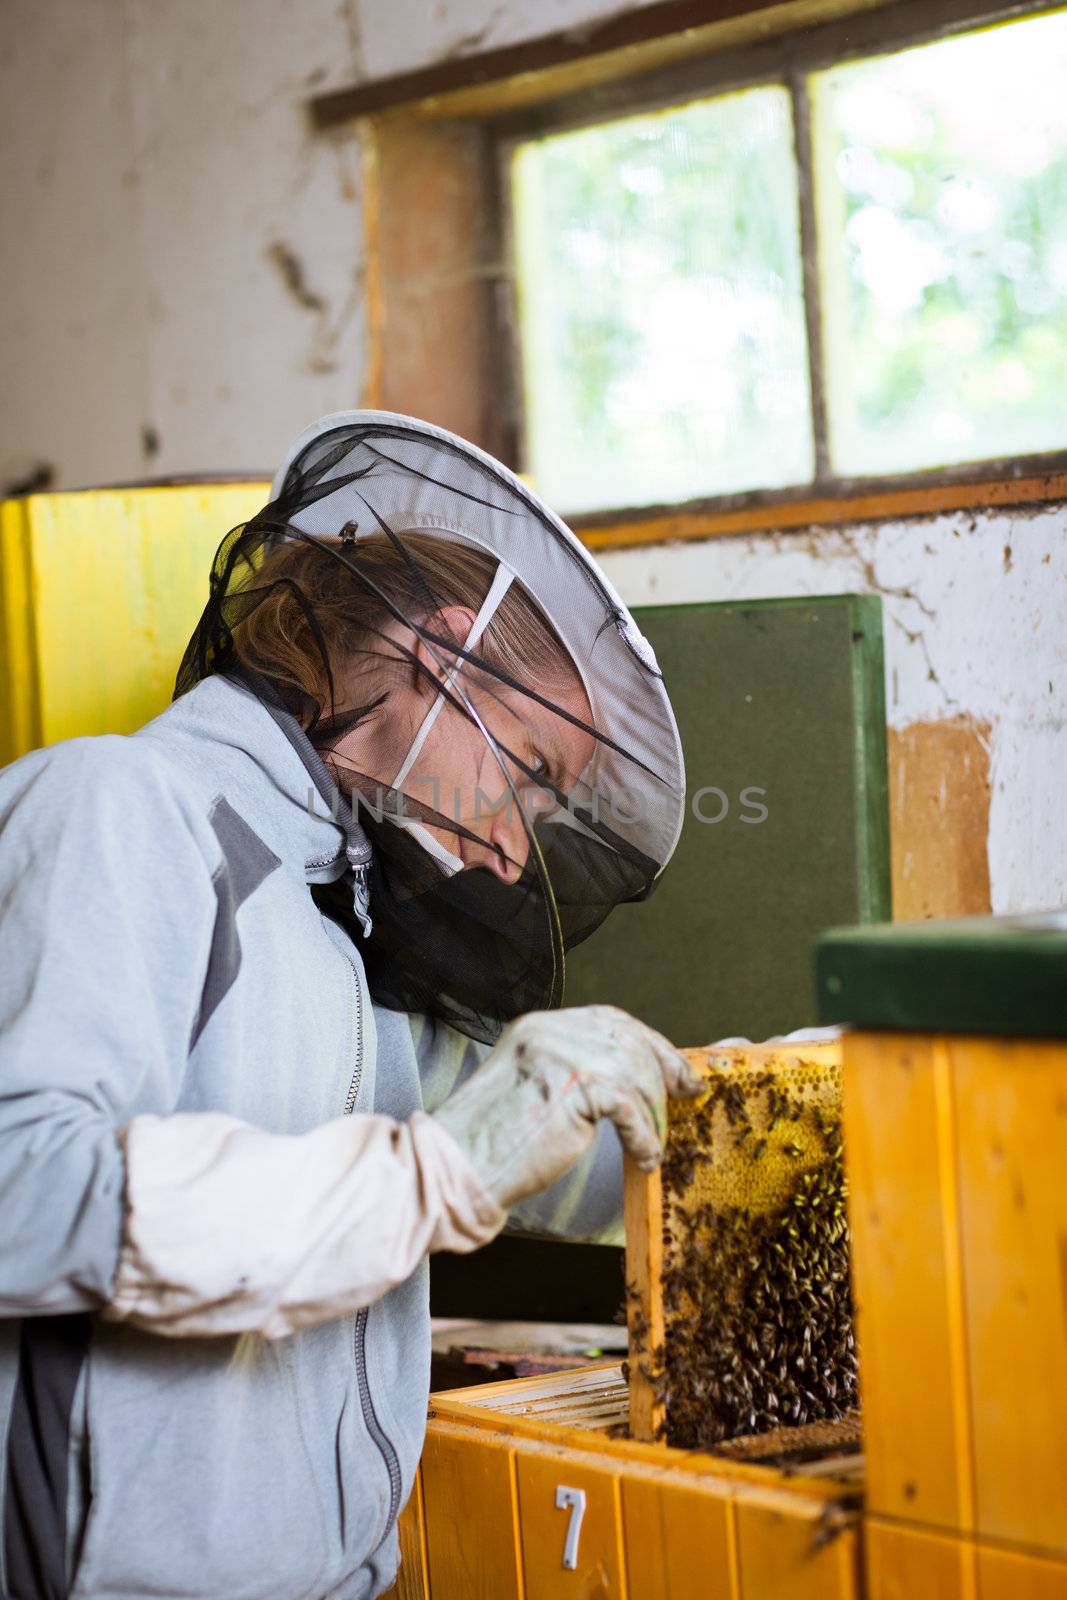 Beekeeper in an apiary holding a frame of honeycomb covered with swarming bees